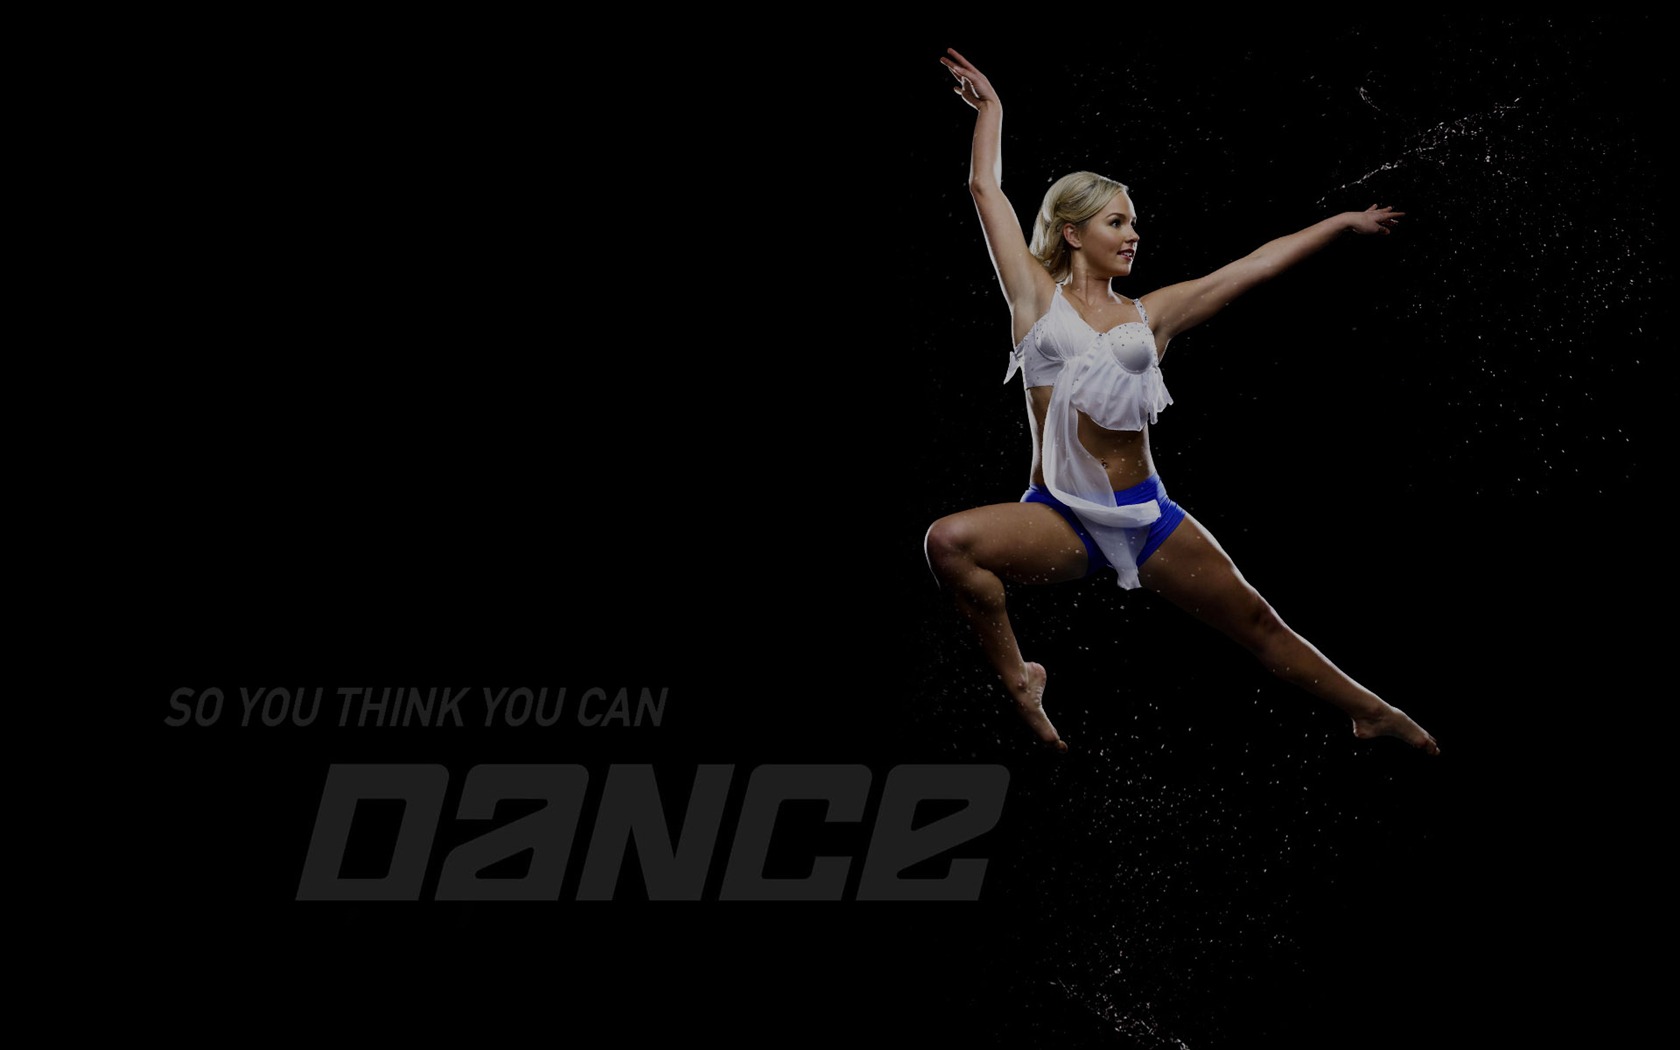 So You Think You Can Dance wallpaper (2) #11 - 1680x1050